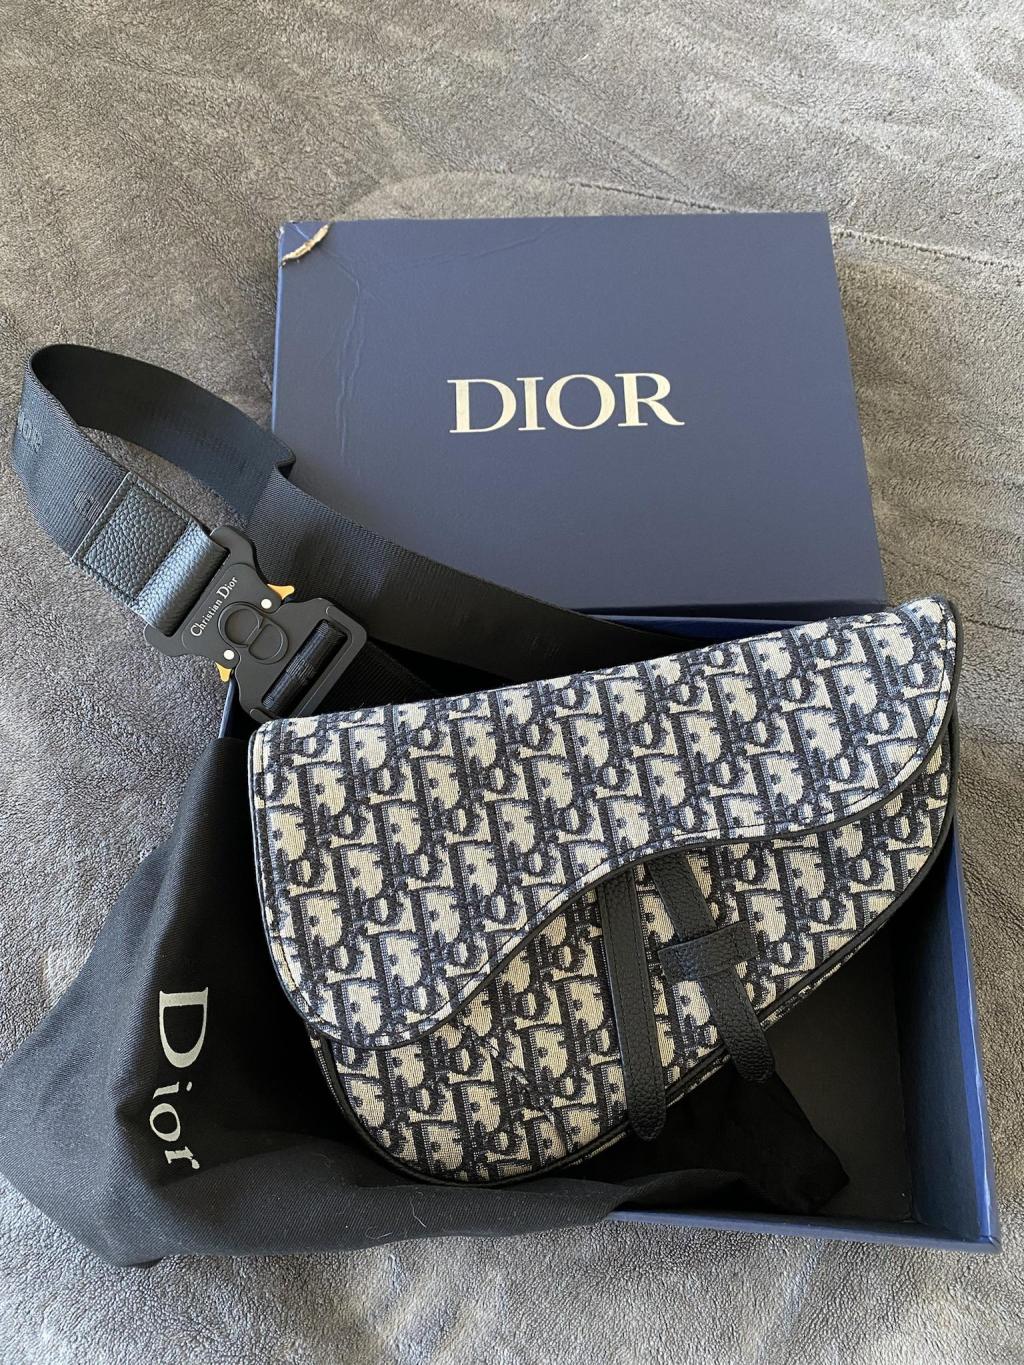 [Review] Dior Saddle Bag from Noname Factory